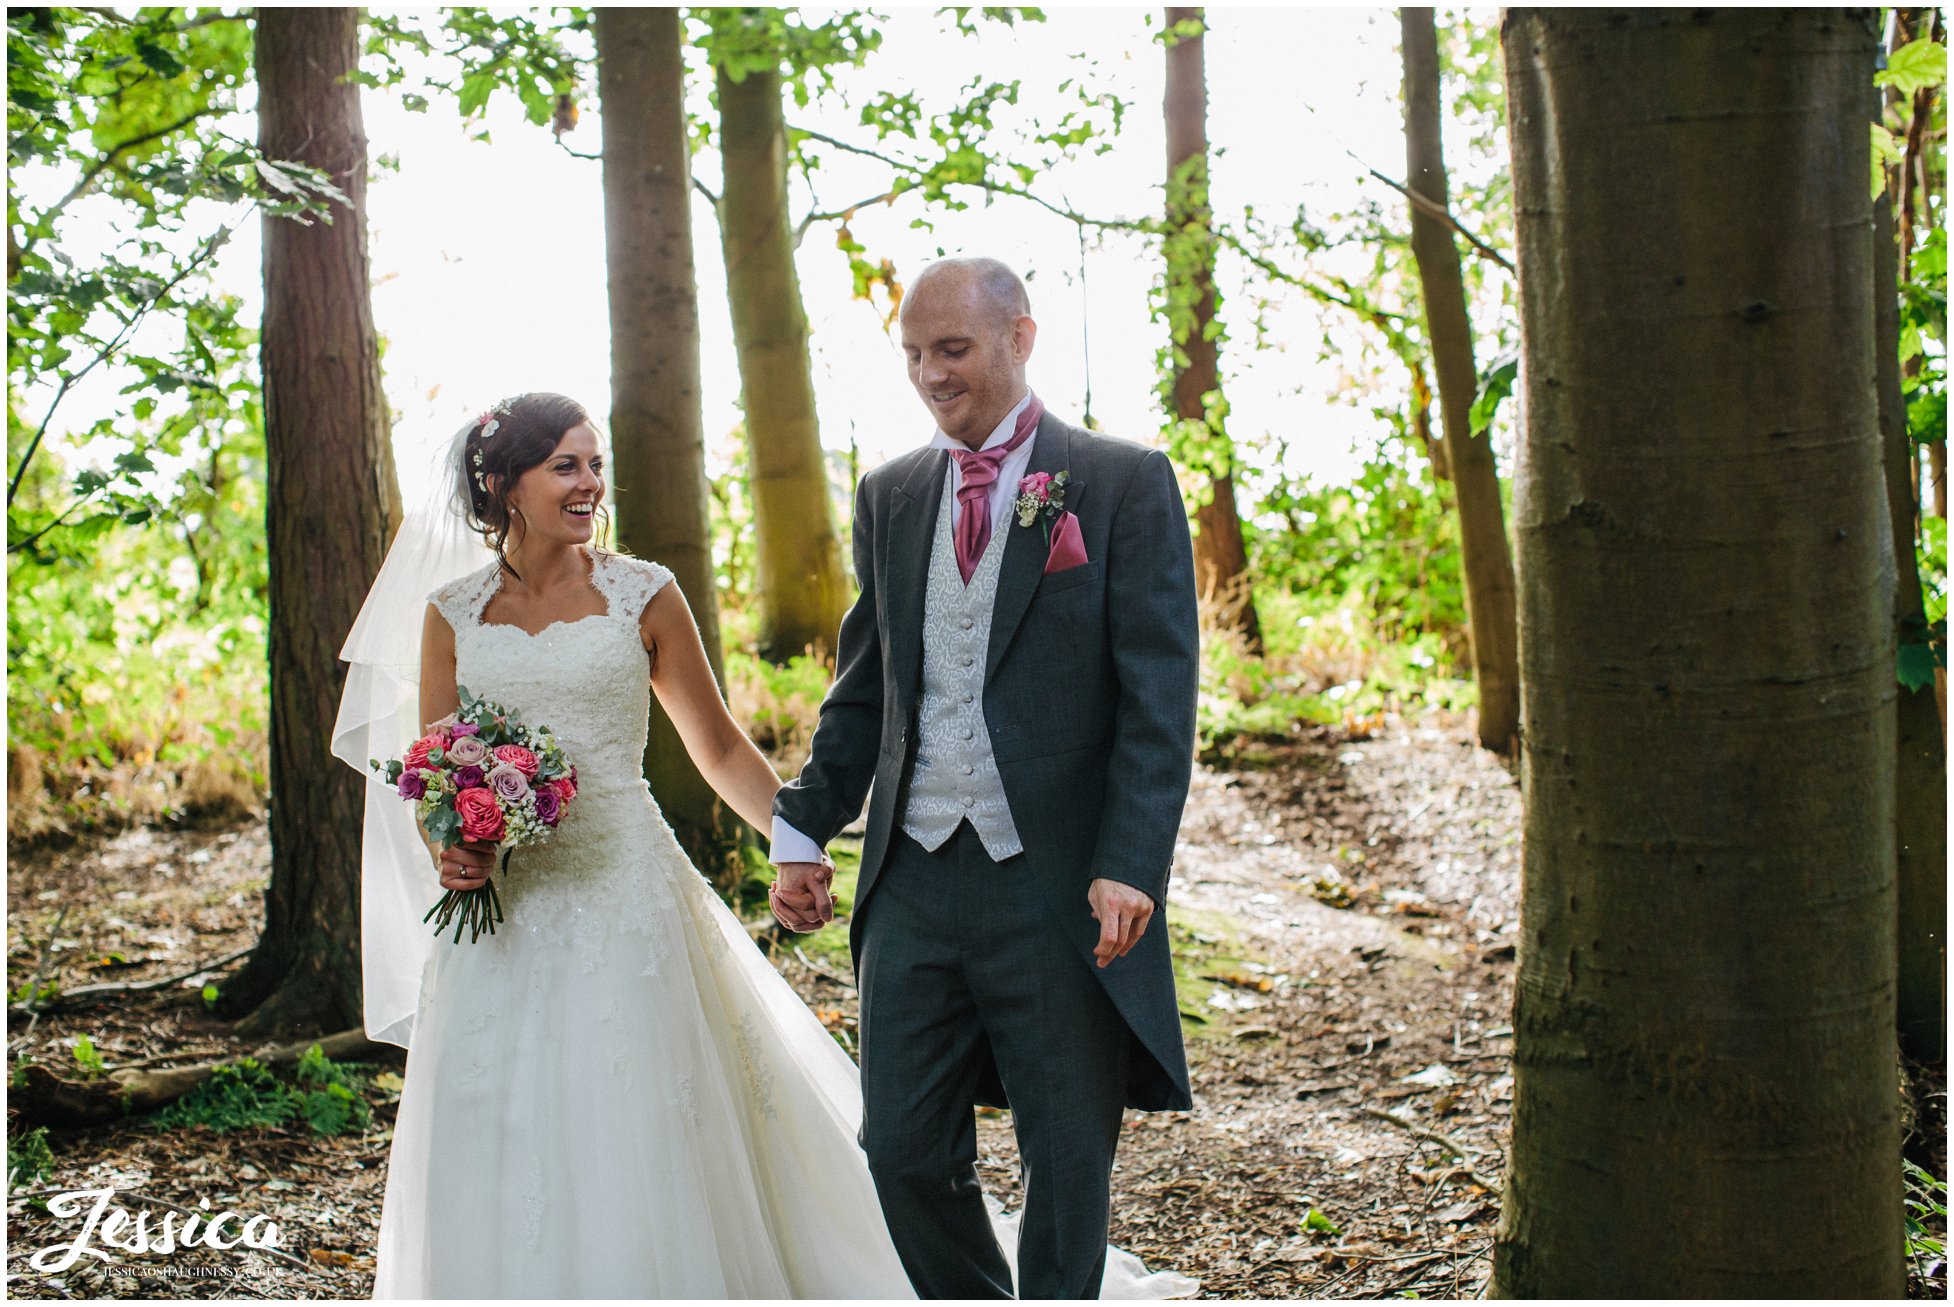 Newly wed's walk through the forest on their wedding day in cheshire